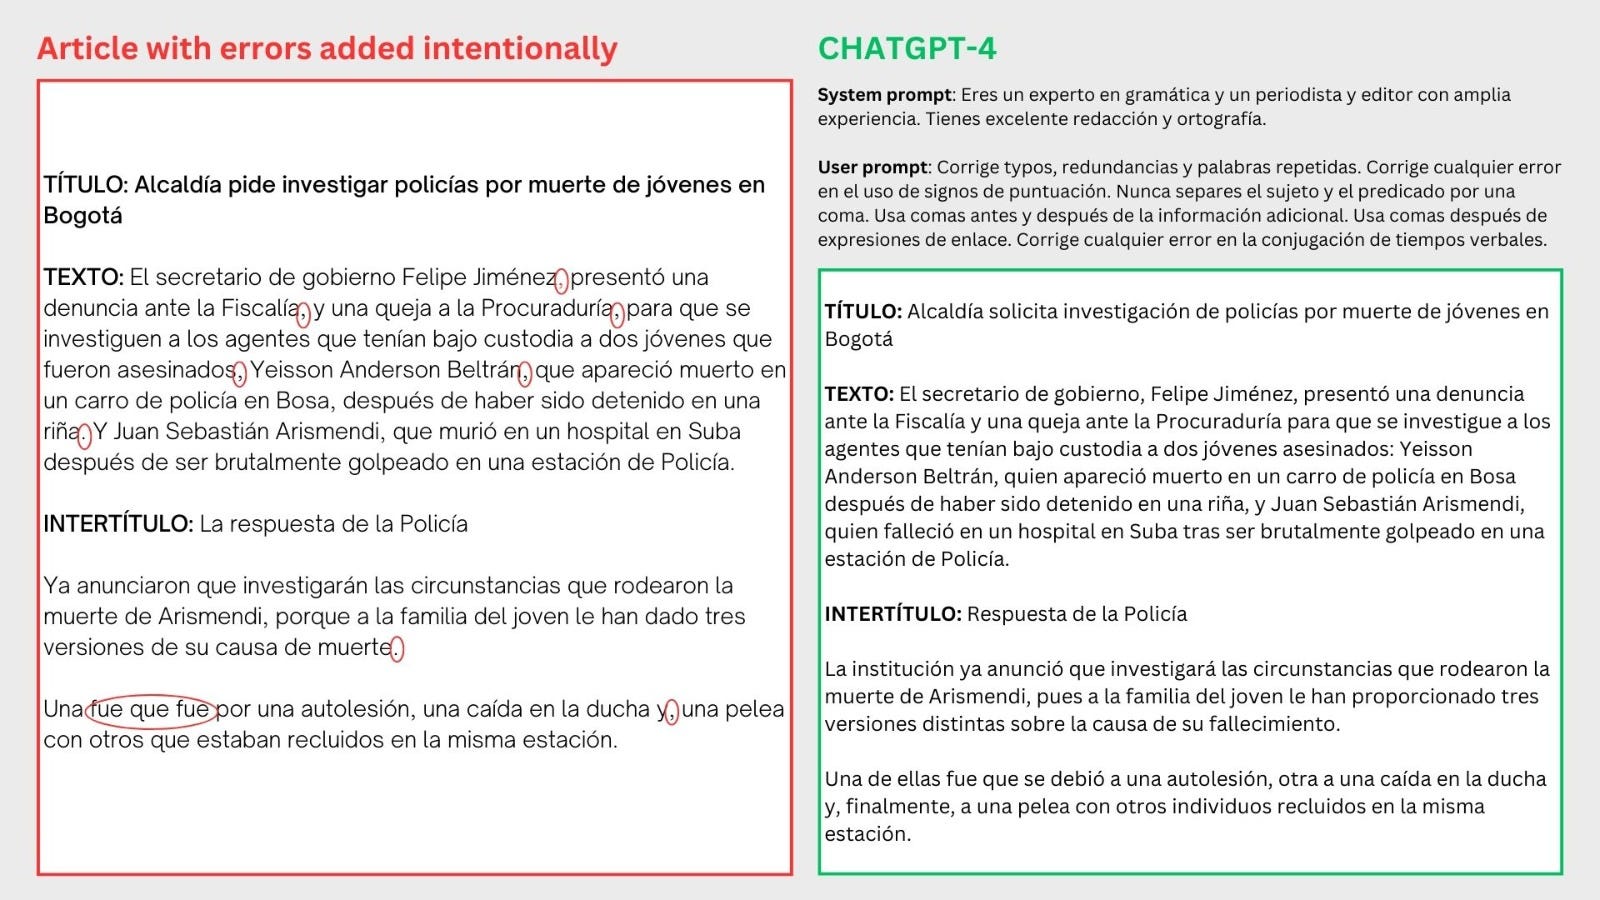 On the left, article with errors added; on the right, ChatGPT-4 corrections and suggestions.